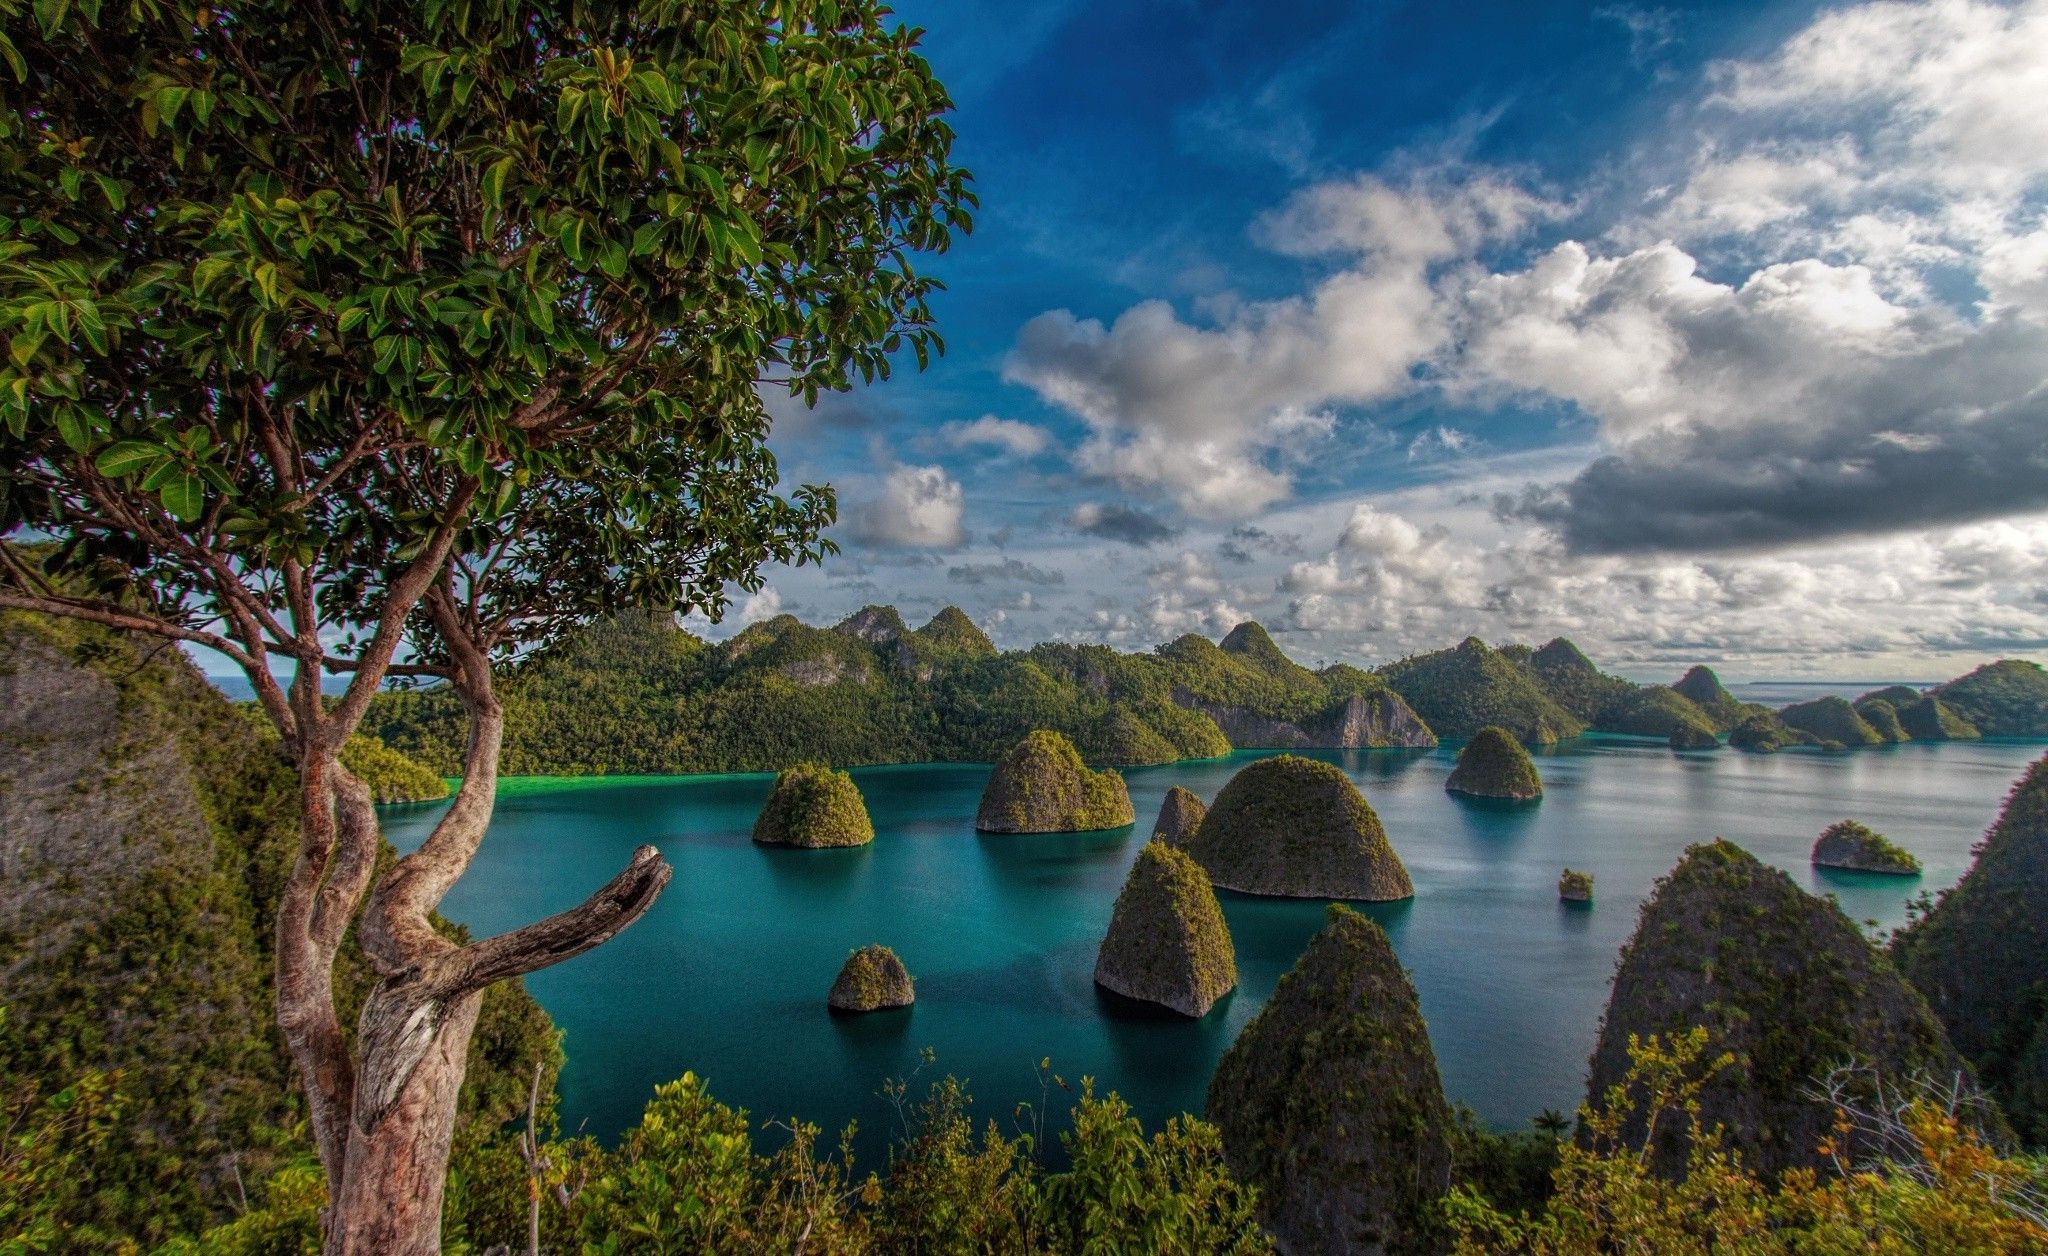 197476-mountain-clouds-forest-tropical-Raja_Ampat-Indonesia-island-sea-trees-beach-exotic-nature-green-turquoise-white-blue-landscape.jpg